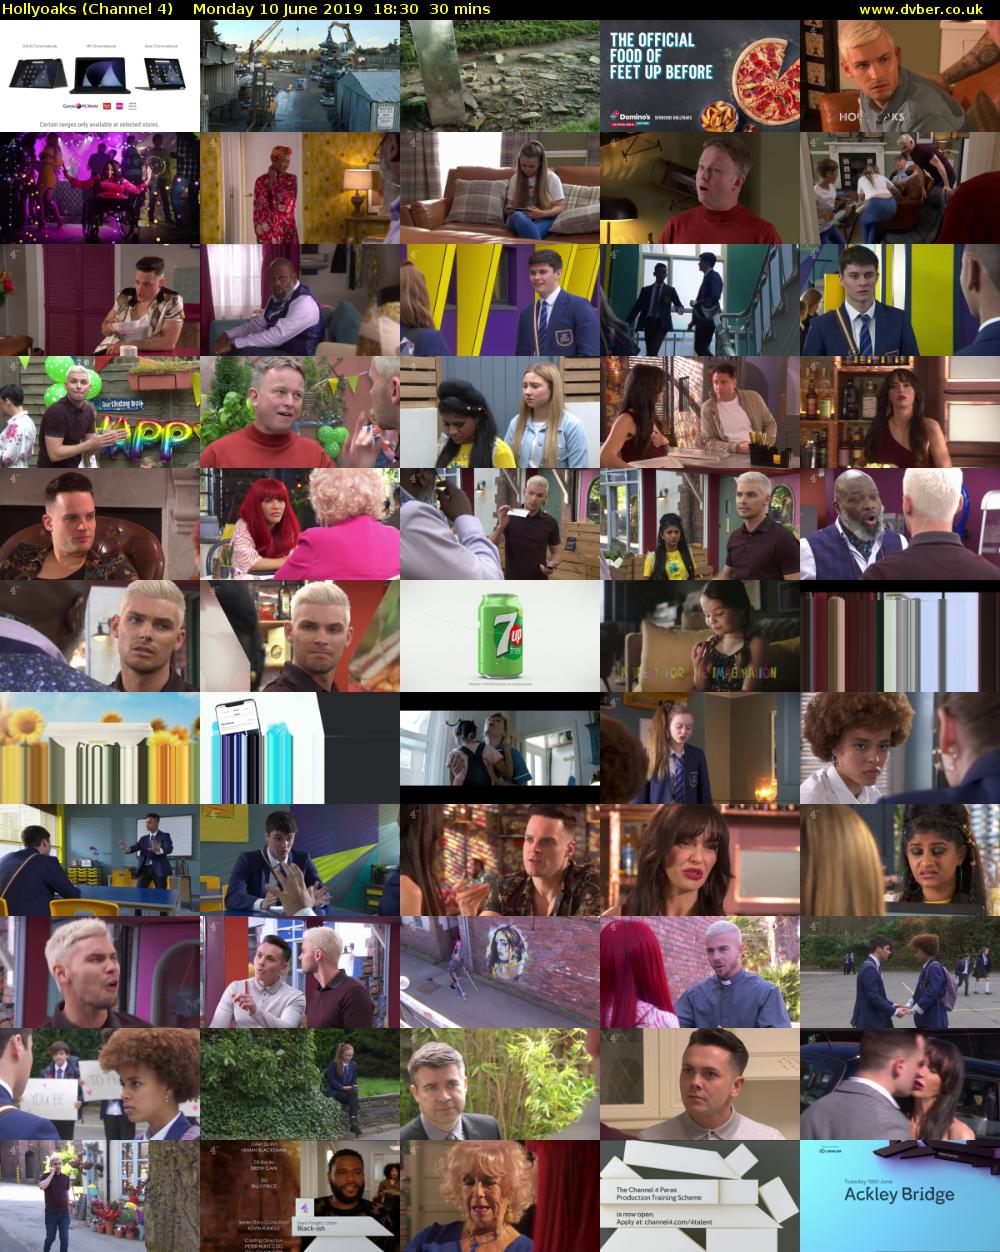 Hollyoaks (Channel 4) Monday 10 June 2019 18:30 - 19:00